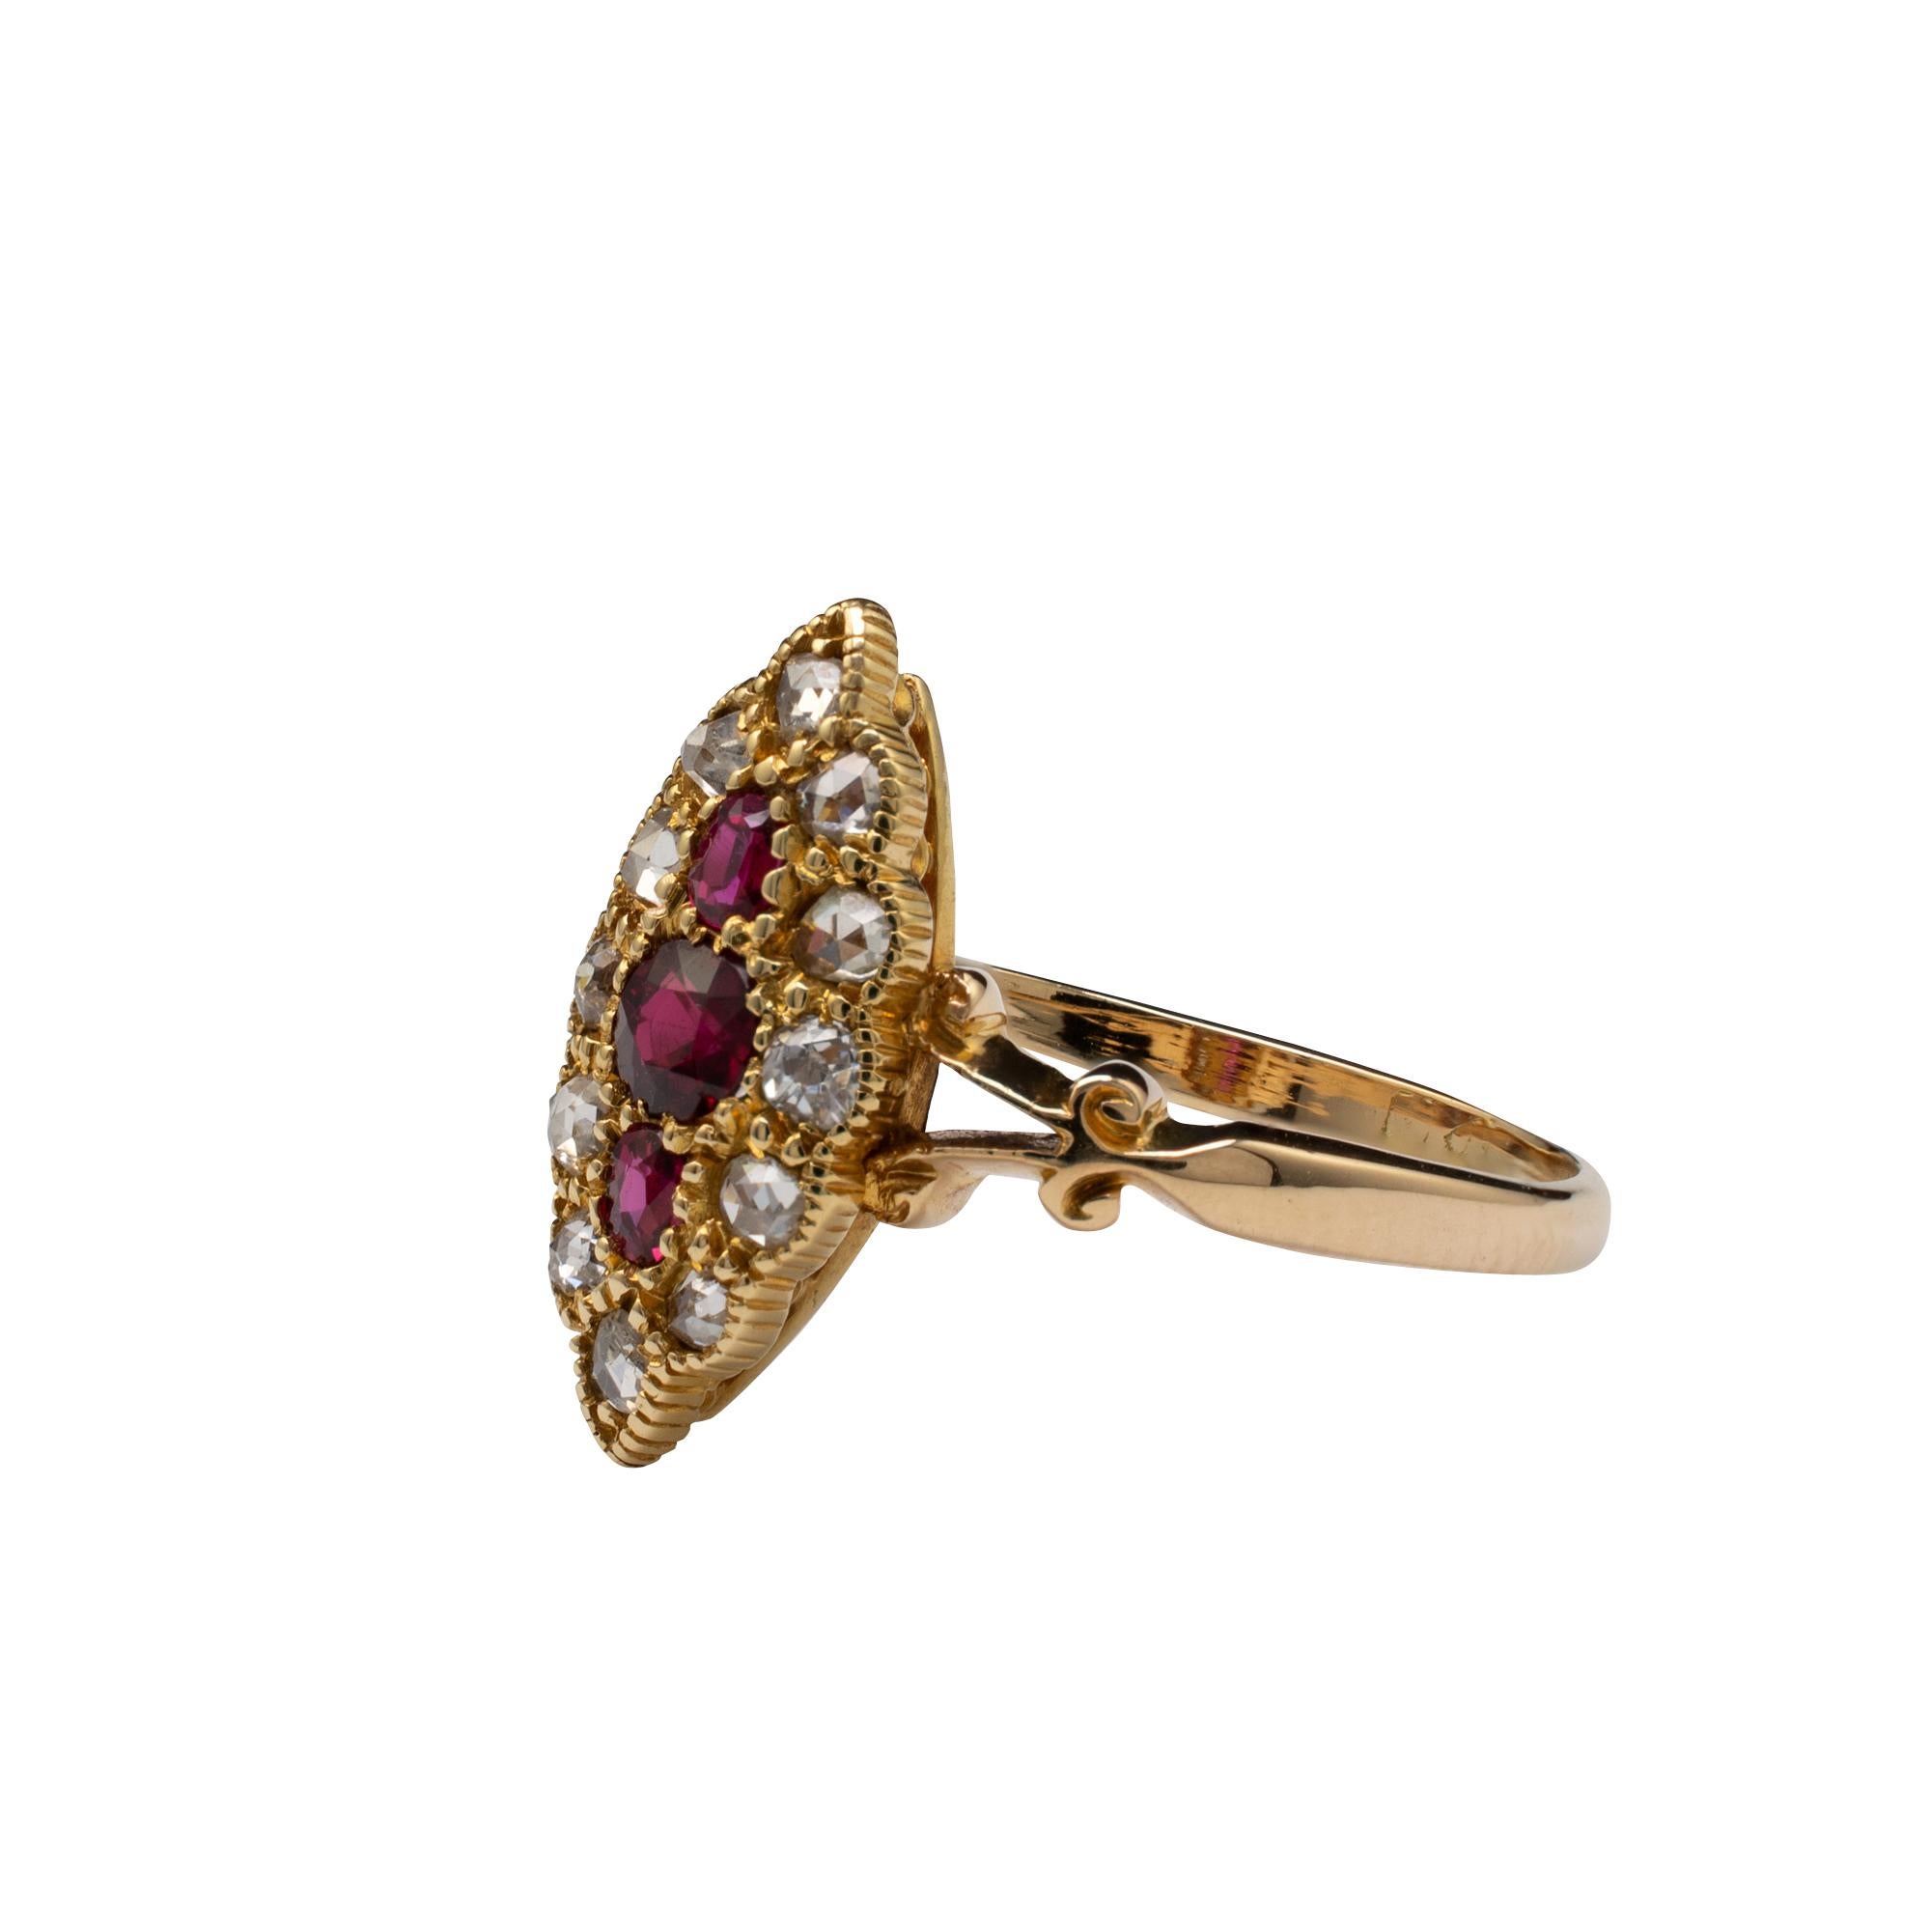 Women's or Men's Antique Marquise Ring Ruby and Diamond Ring, 18 Karat Gold Chester Hallmarks